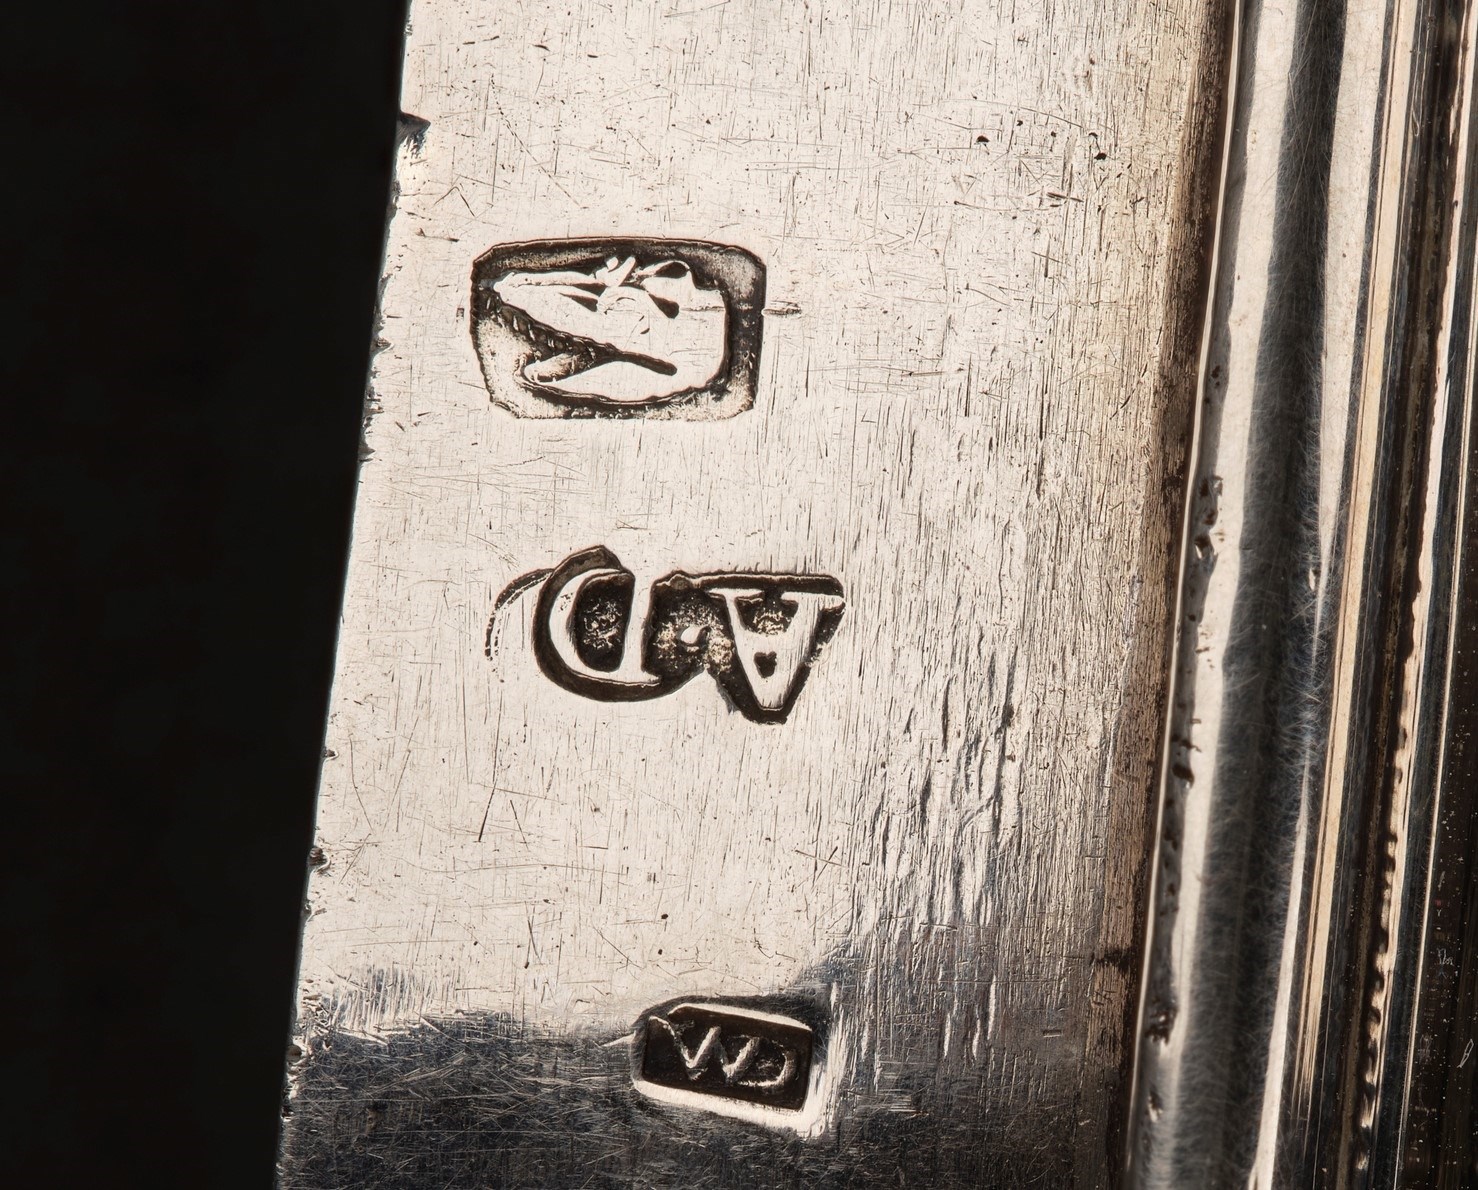 Closeup of a stamped engraving on the edge of a silver vessel. There are three stamps: on top, an alligator's head within a rectangle. In middle, the letters 'A' 'D' upside down. On bottom, the letters 'C' 'M' updside down.